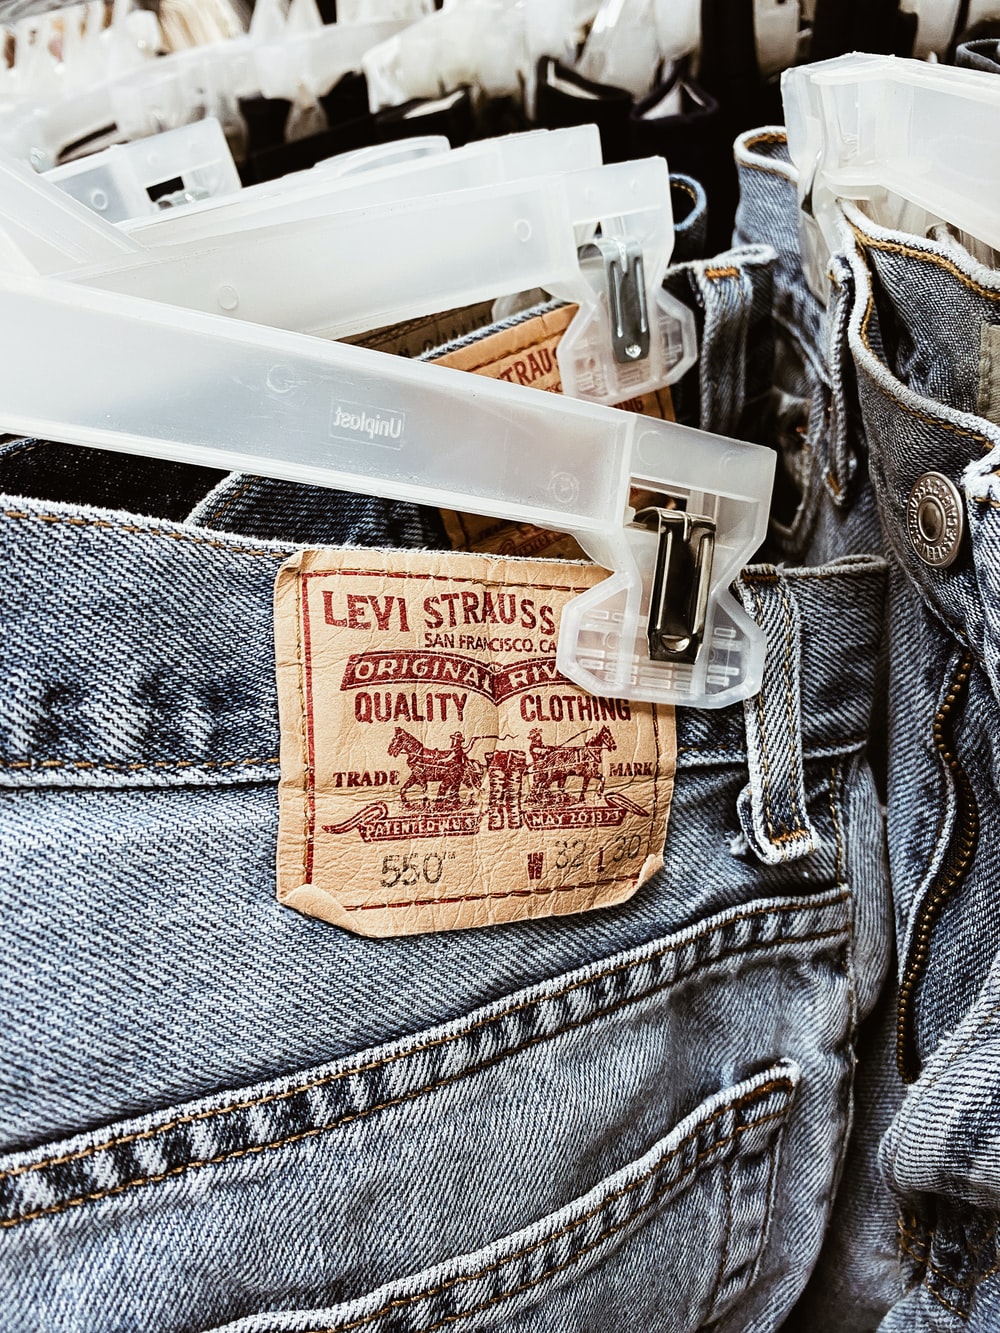 Levi'S Wallpapers